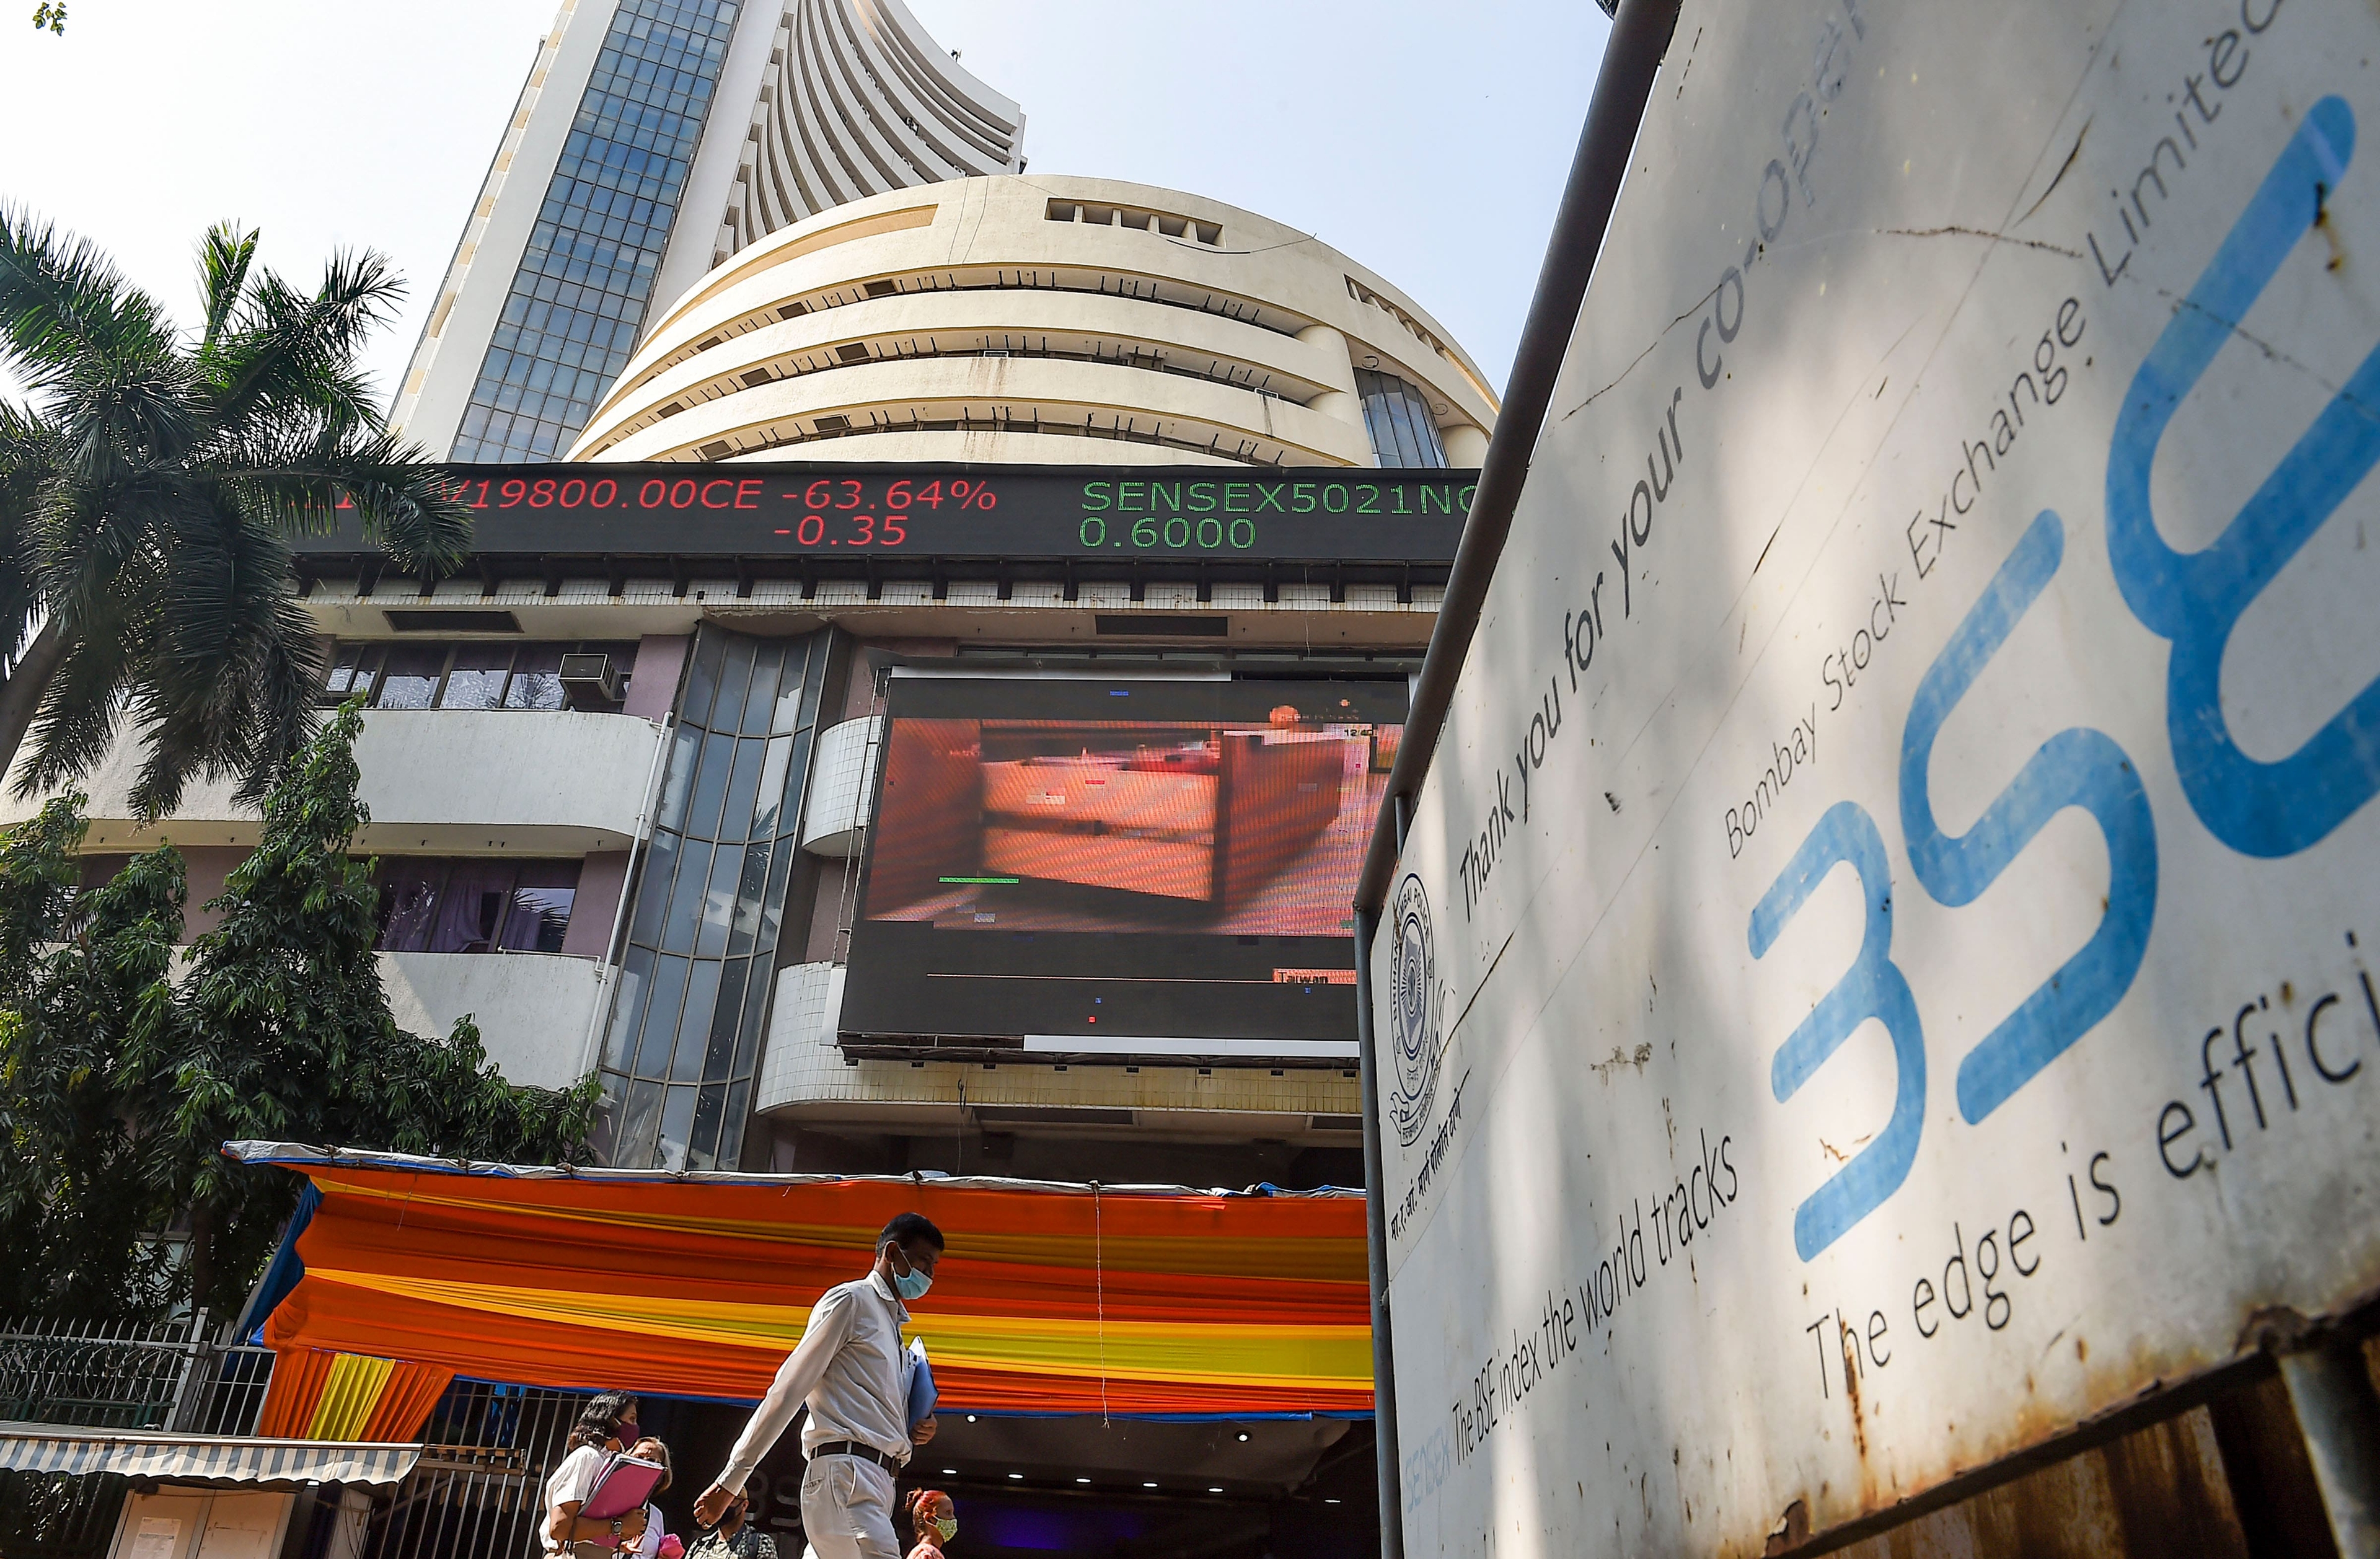 The Indian market remained under pressure for the fourth consecutive session on April 18 on the back of uninspiring quarterly earnings, elevated geopolitical tensions and soaring inflation. Sensex closed 1,172 points, or 2.01 percent, lower at 57,166.74 with 20 stocks in the red while the Nifty lost 302 points, or 1.73 percent, to settle at 17,173.65.